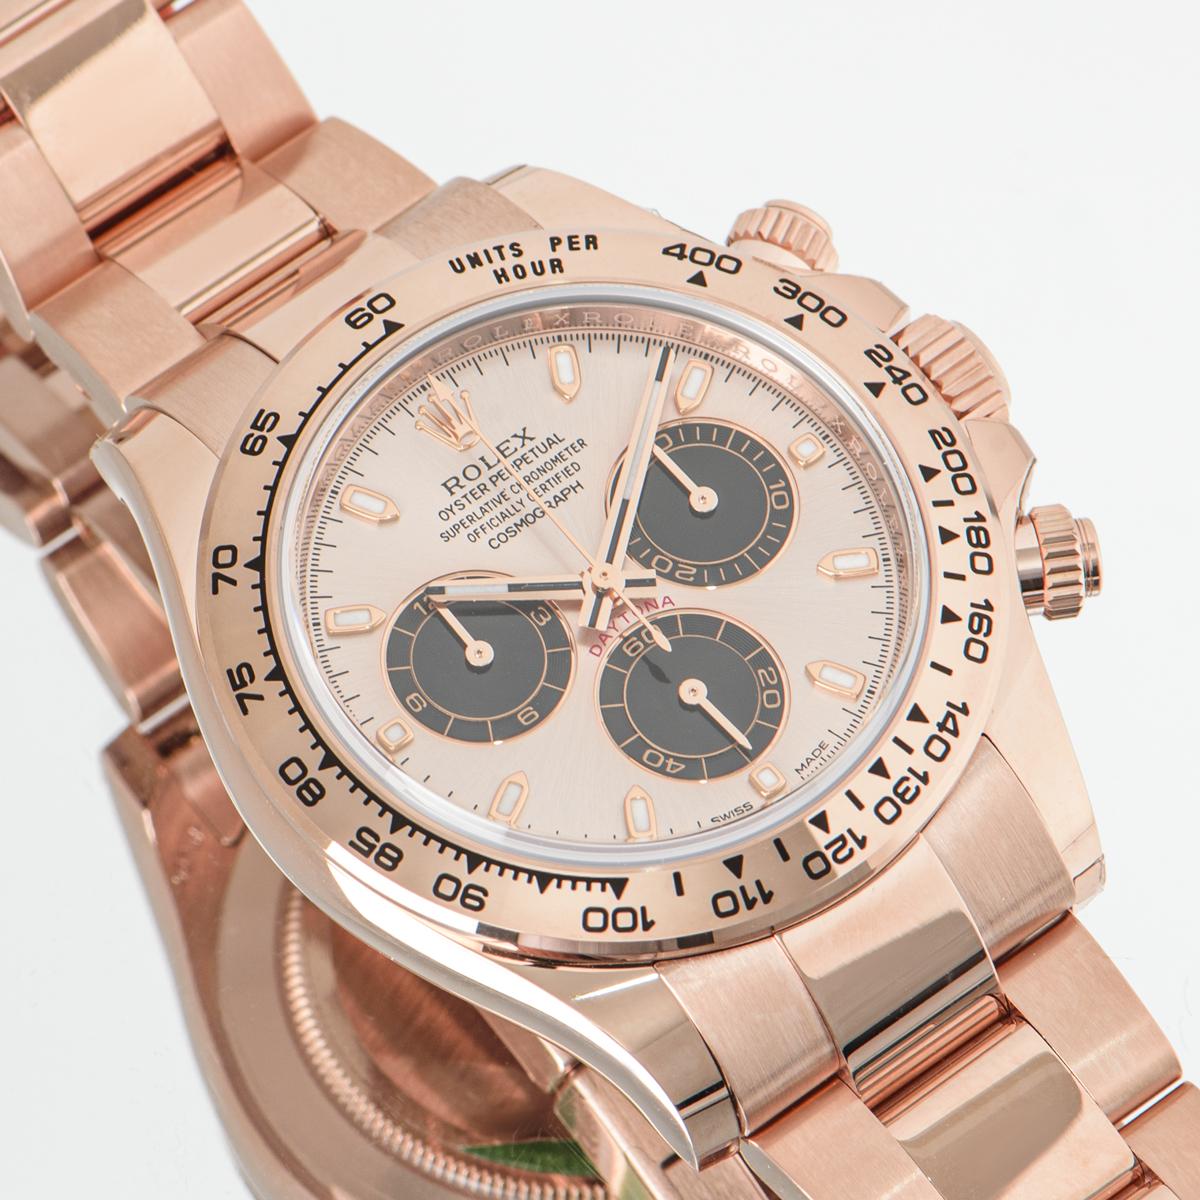 An unworn 40mm rose gold Cosmograph Daytona from Rolex, featuring a sundust and black dial which is a new 2021 release. With an engraved tachymetric scale, three counters and pushers, the Daytona was designed to be the ultimate timing tool for